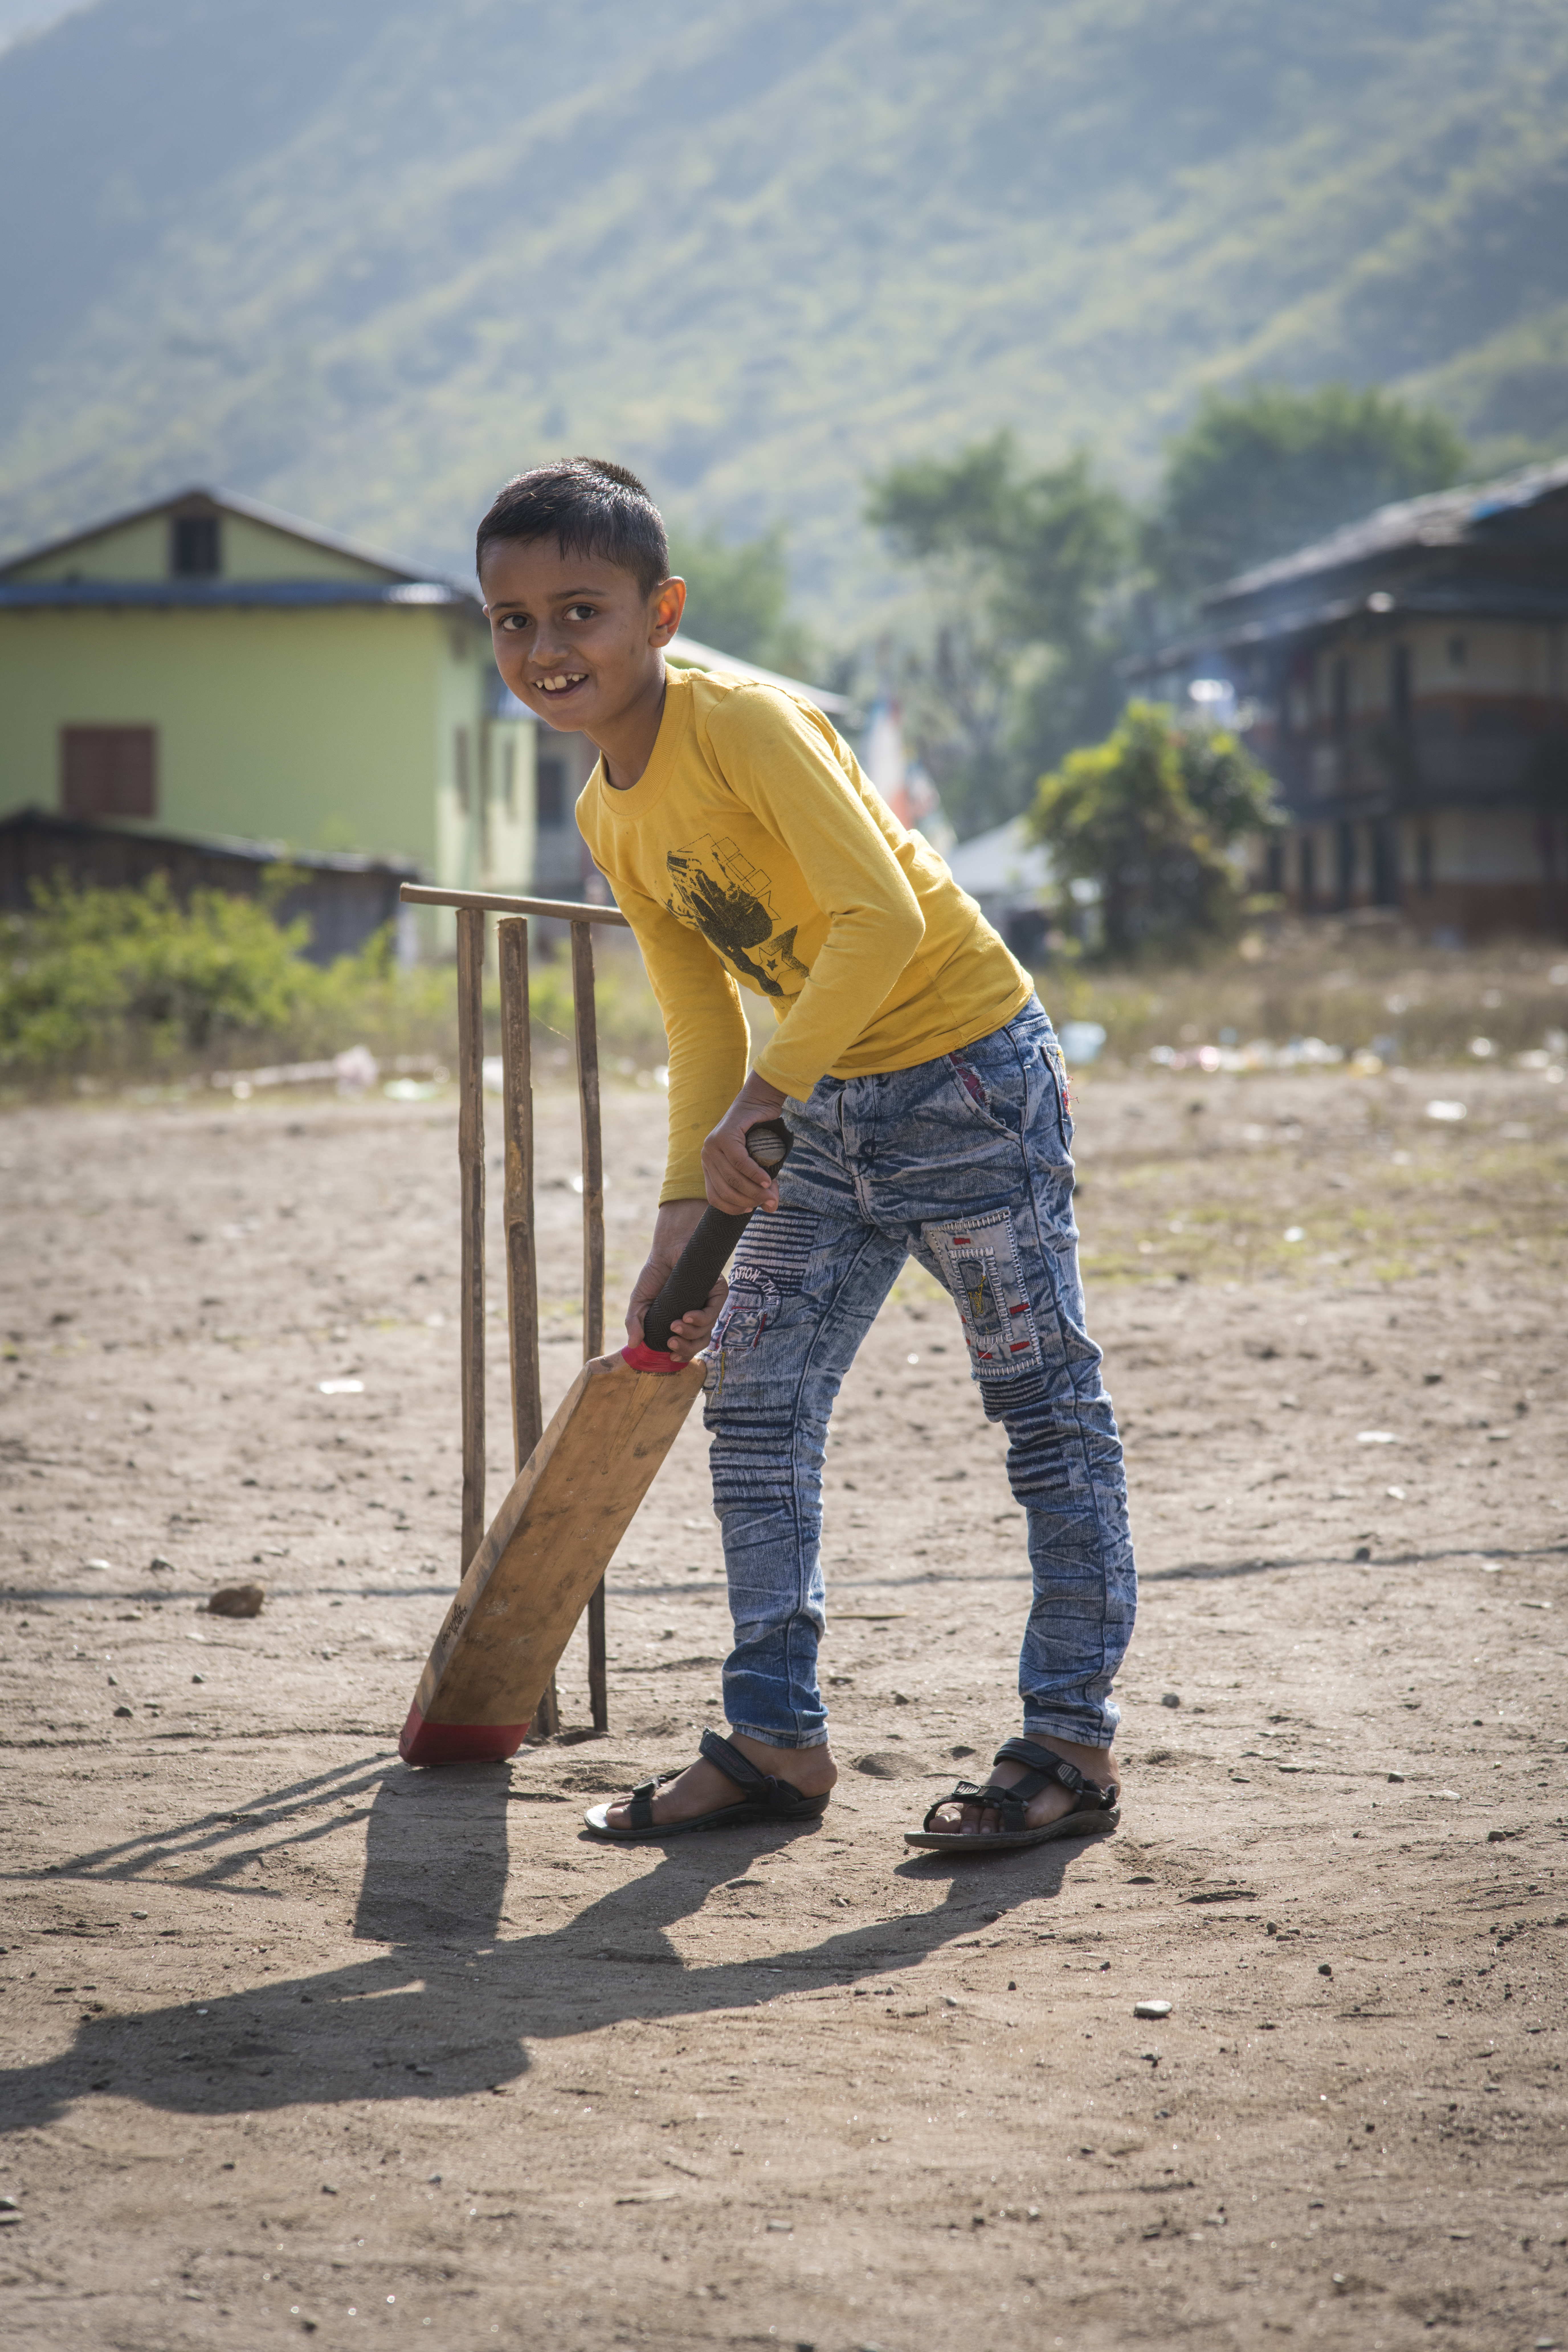 A boy stands with cricket bat, in front of the stumps, ready to play cricket